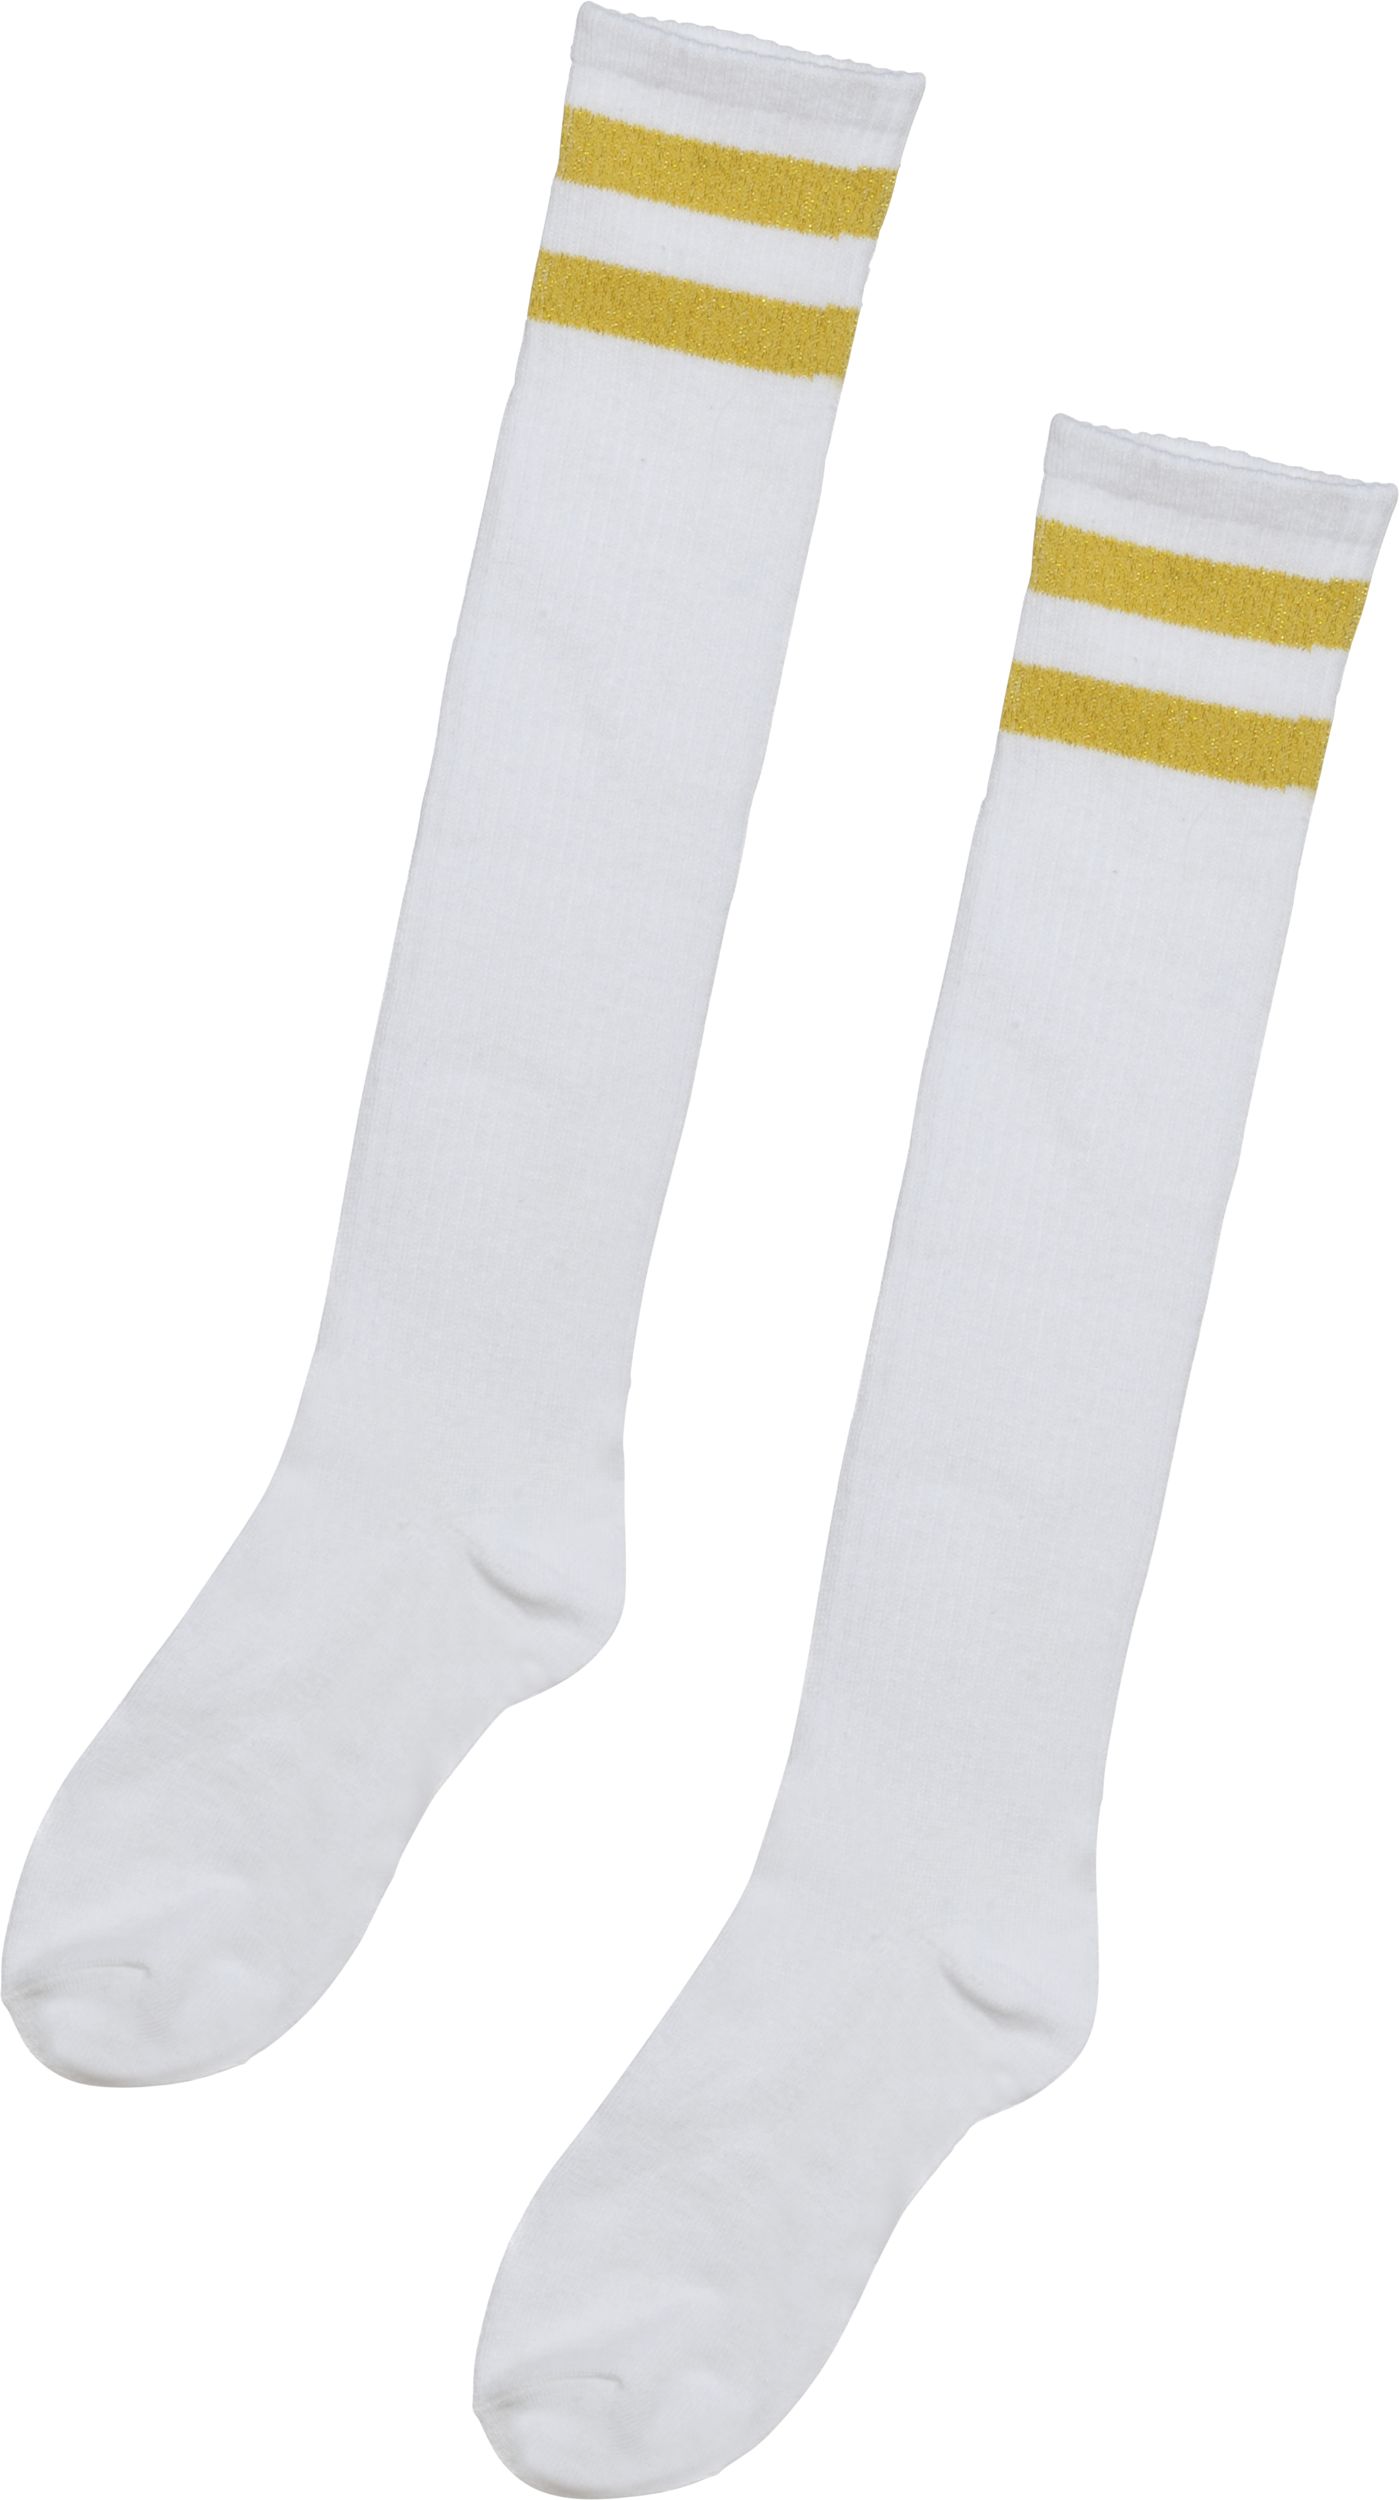 Adult Athletic Knee High Socks, Assorted Colours Striped, One Size,  Wearable Costume Accessory for Halloween